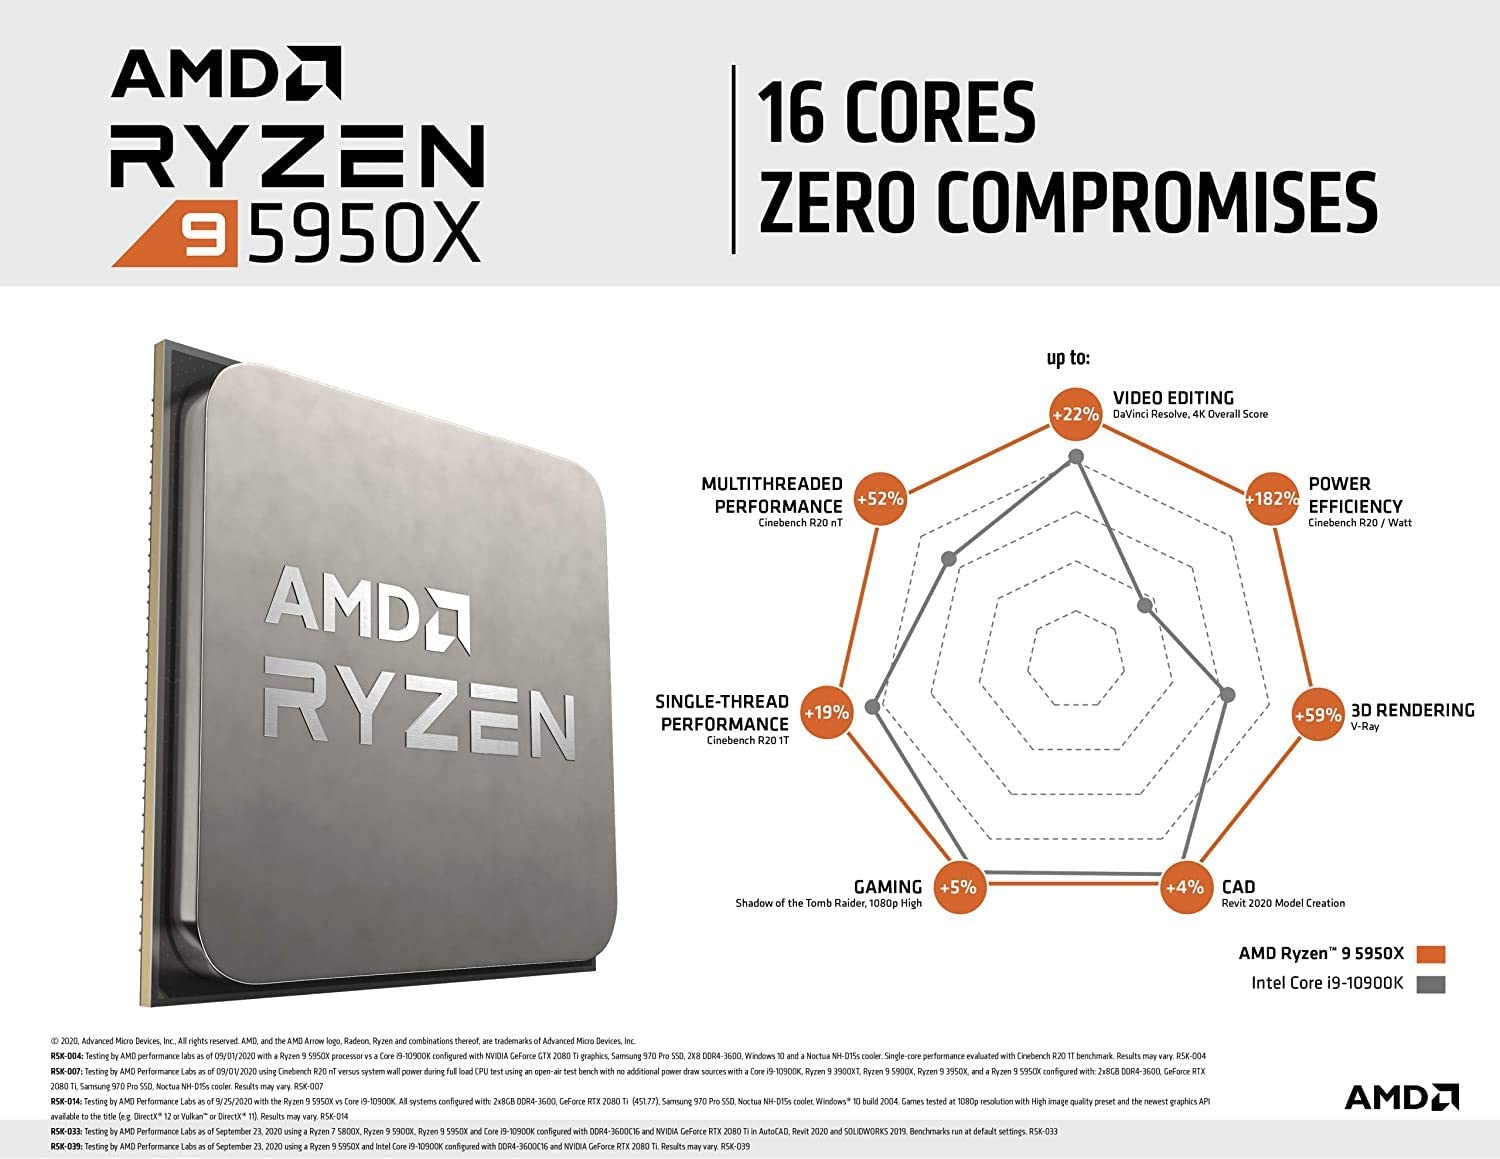 AMD CPU Ryzen 9 5950X Tray Pack [3.40~4.90 GHz, 16 Cores, 32 Threads, 64 MB L3 Cache, 8MB L2 Cache, 7nm, Zen 3, AM4, Support DDR4]